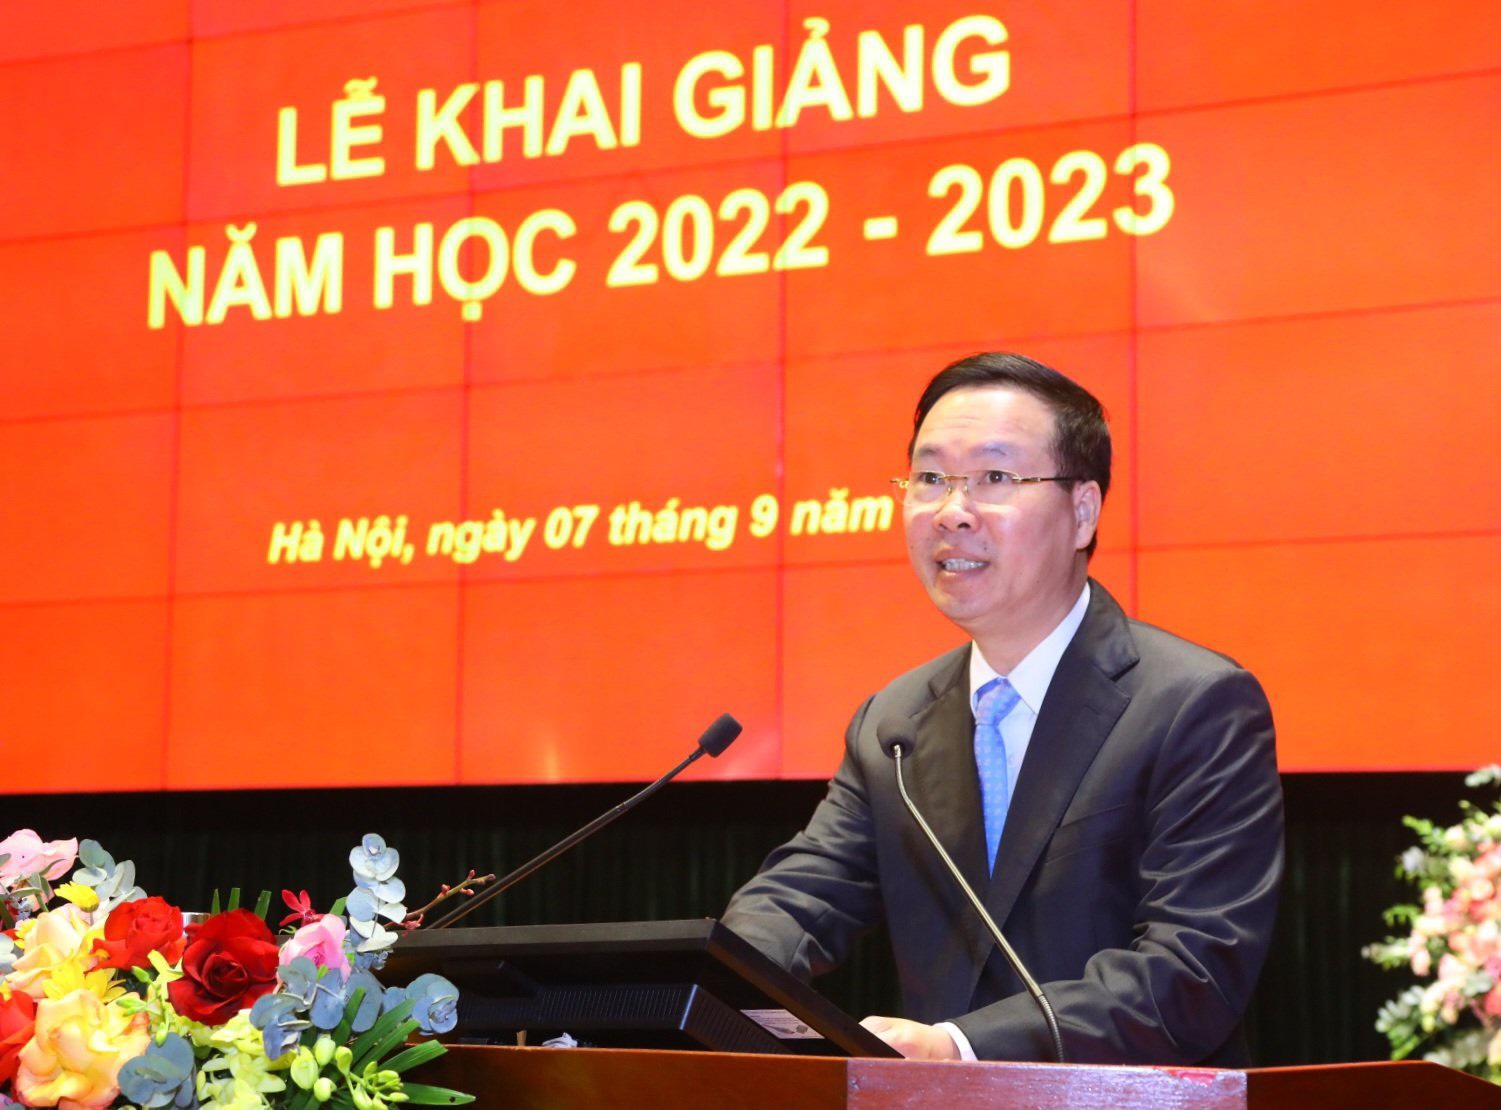 Ho Chi Minh National Academy of Politics organizes opening ceremony of the 2022-2023 academic year